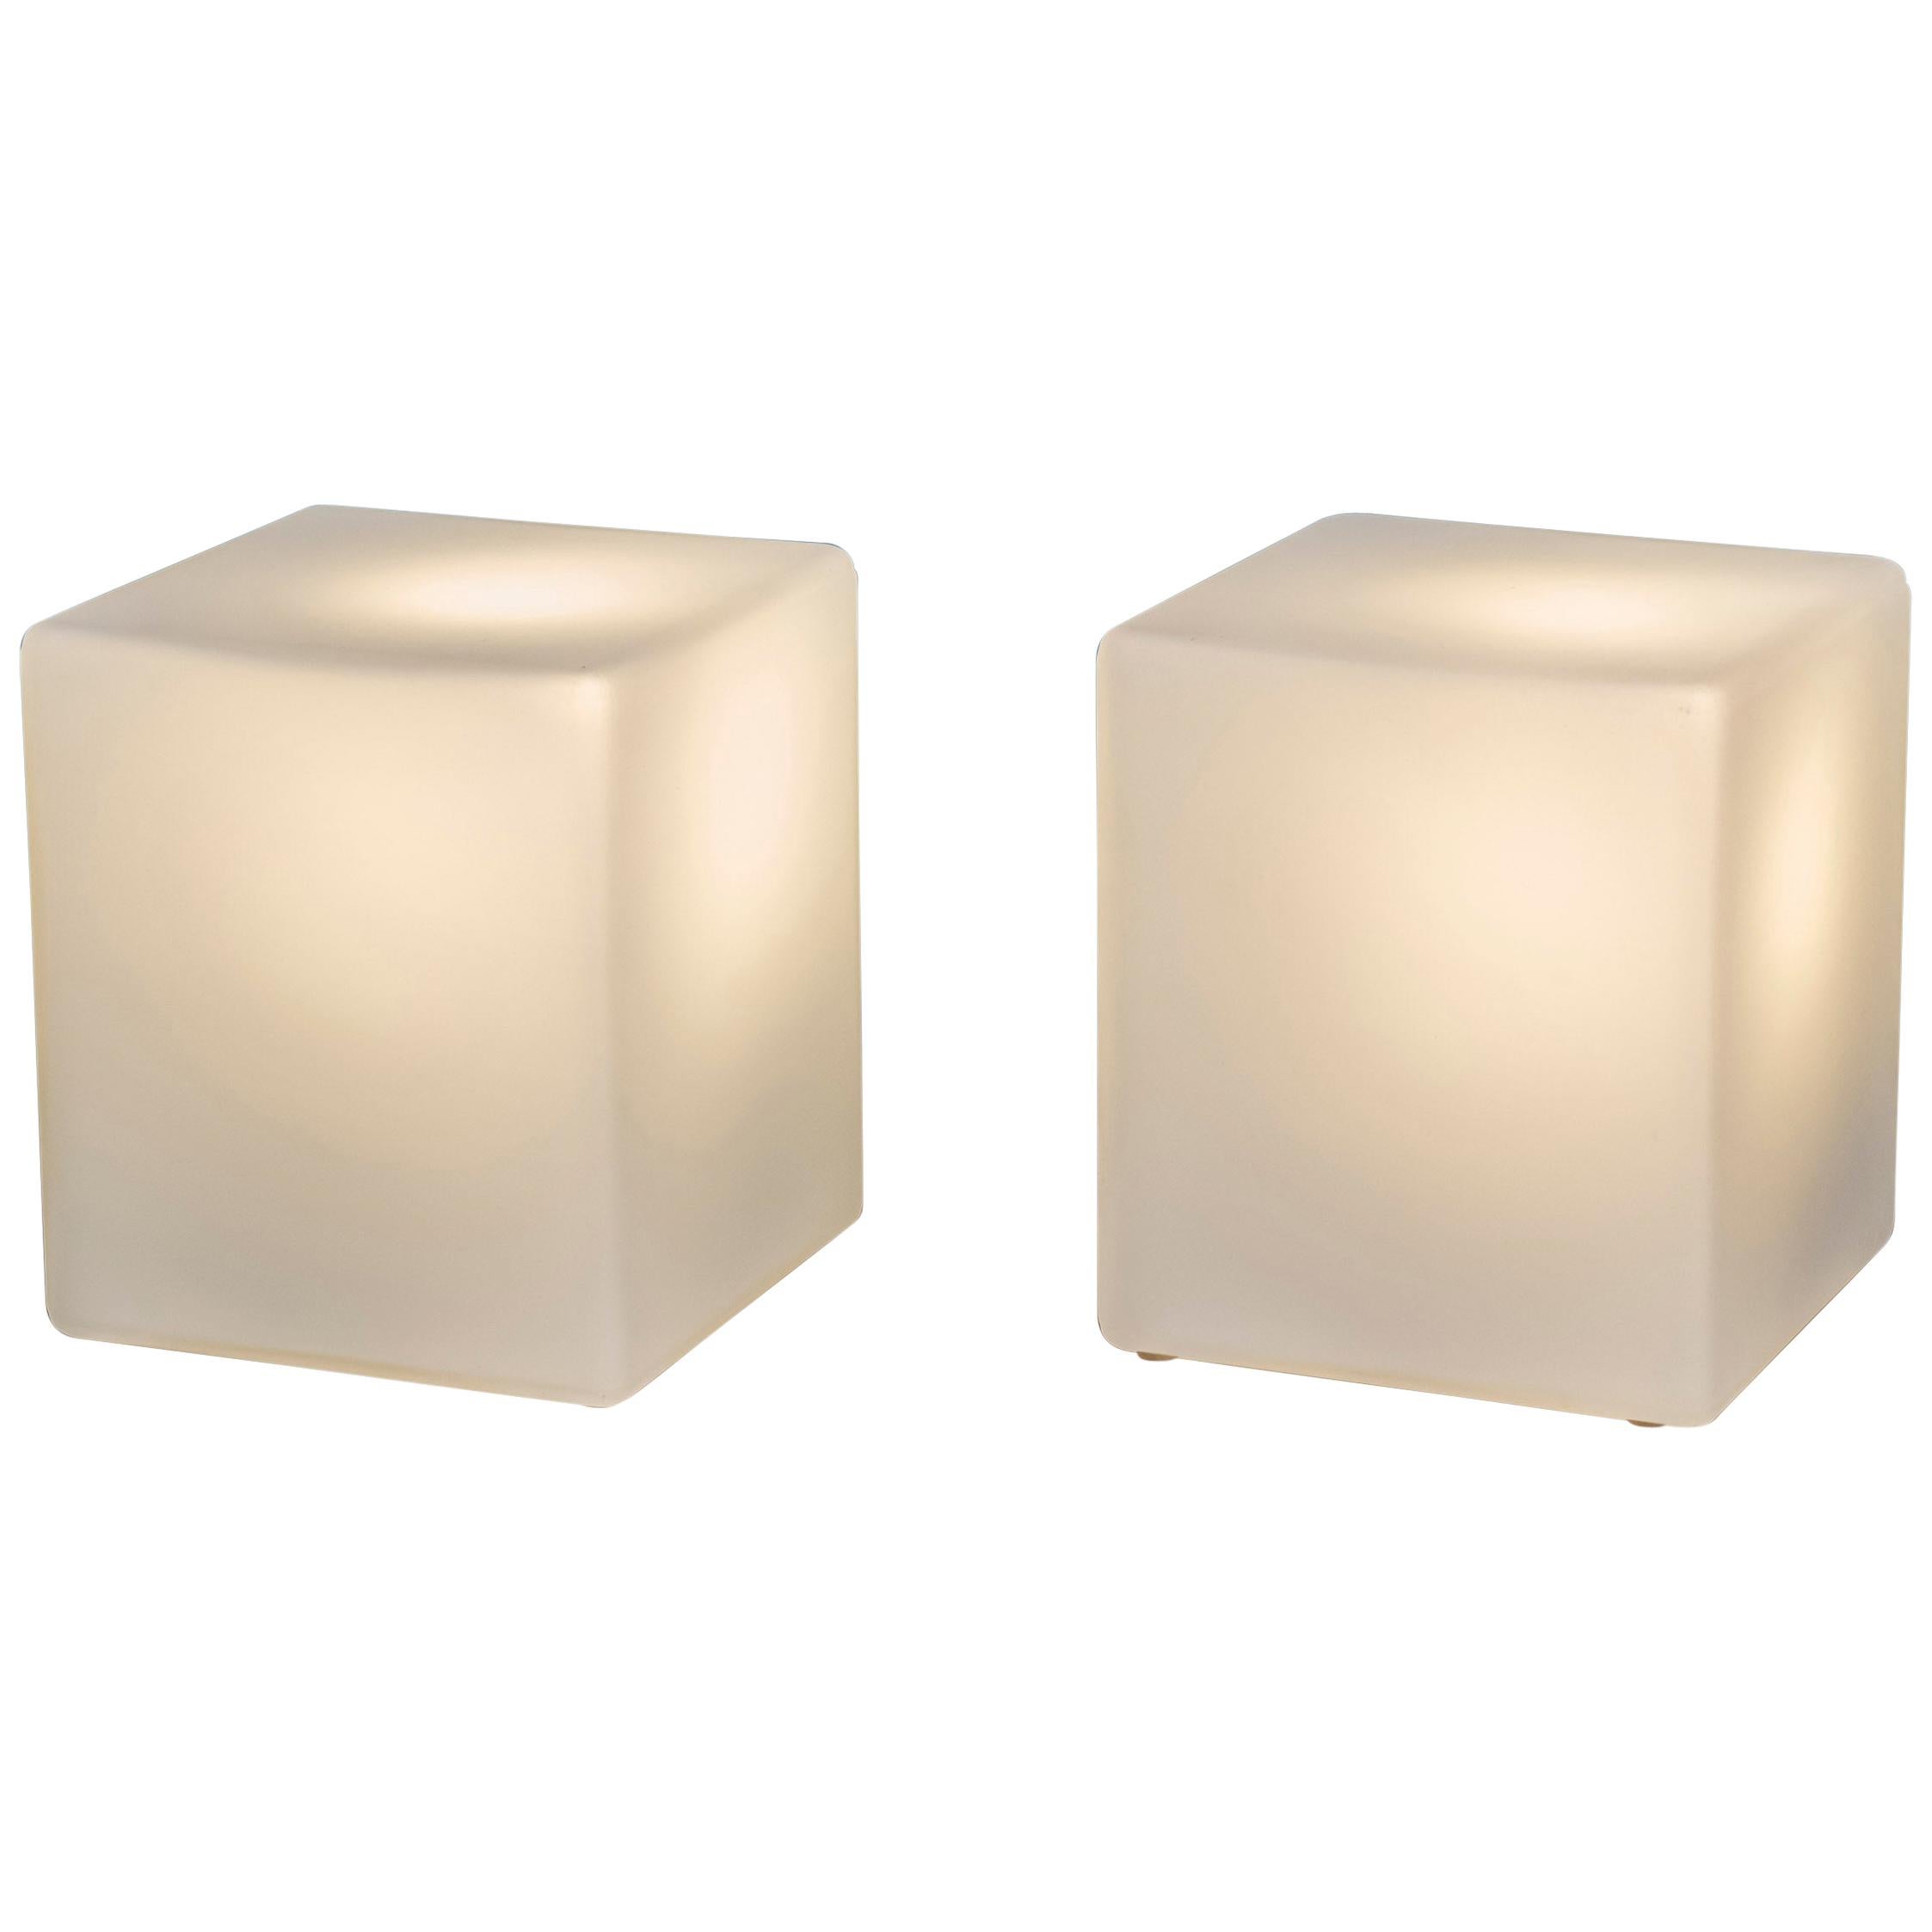 Cube Form Table Lamps by Laurel